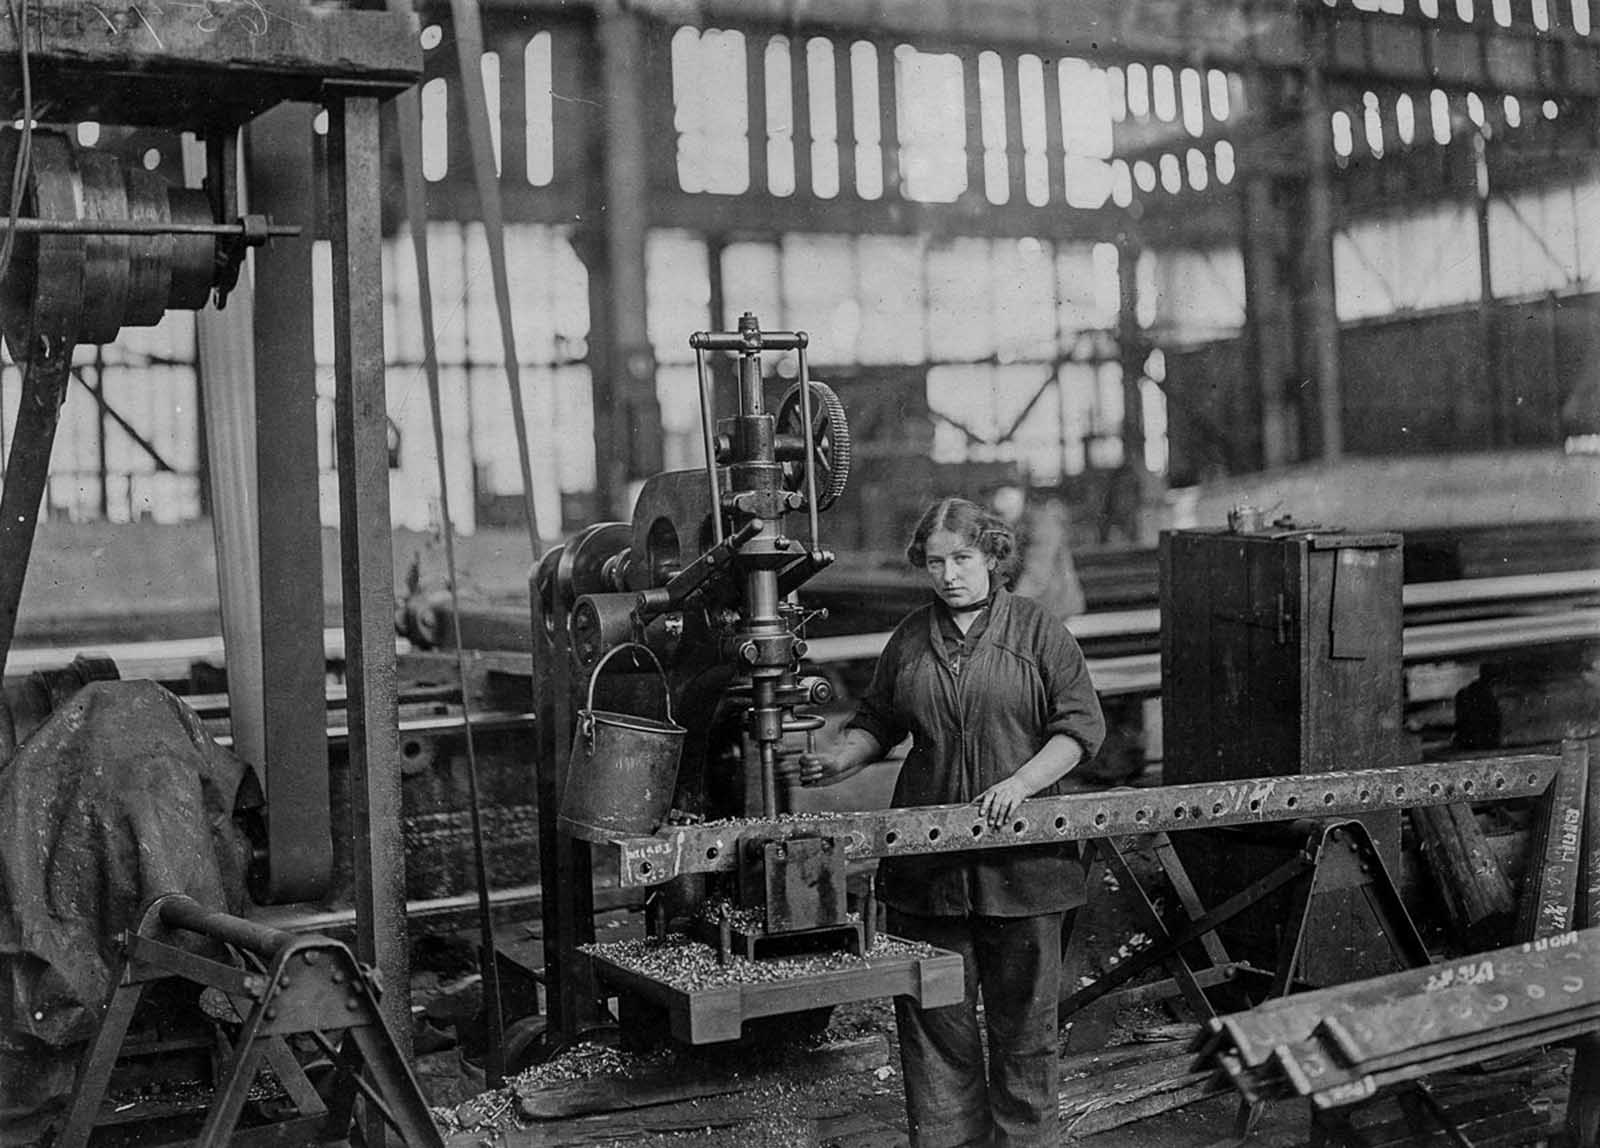 A worker drills holes for the ribs of airship sheds.